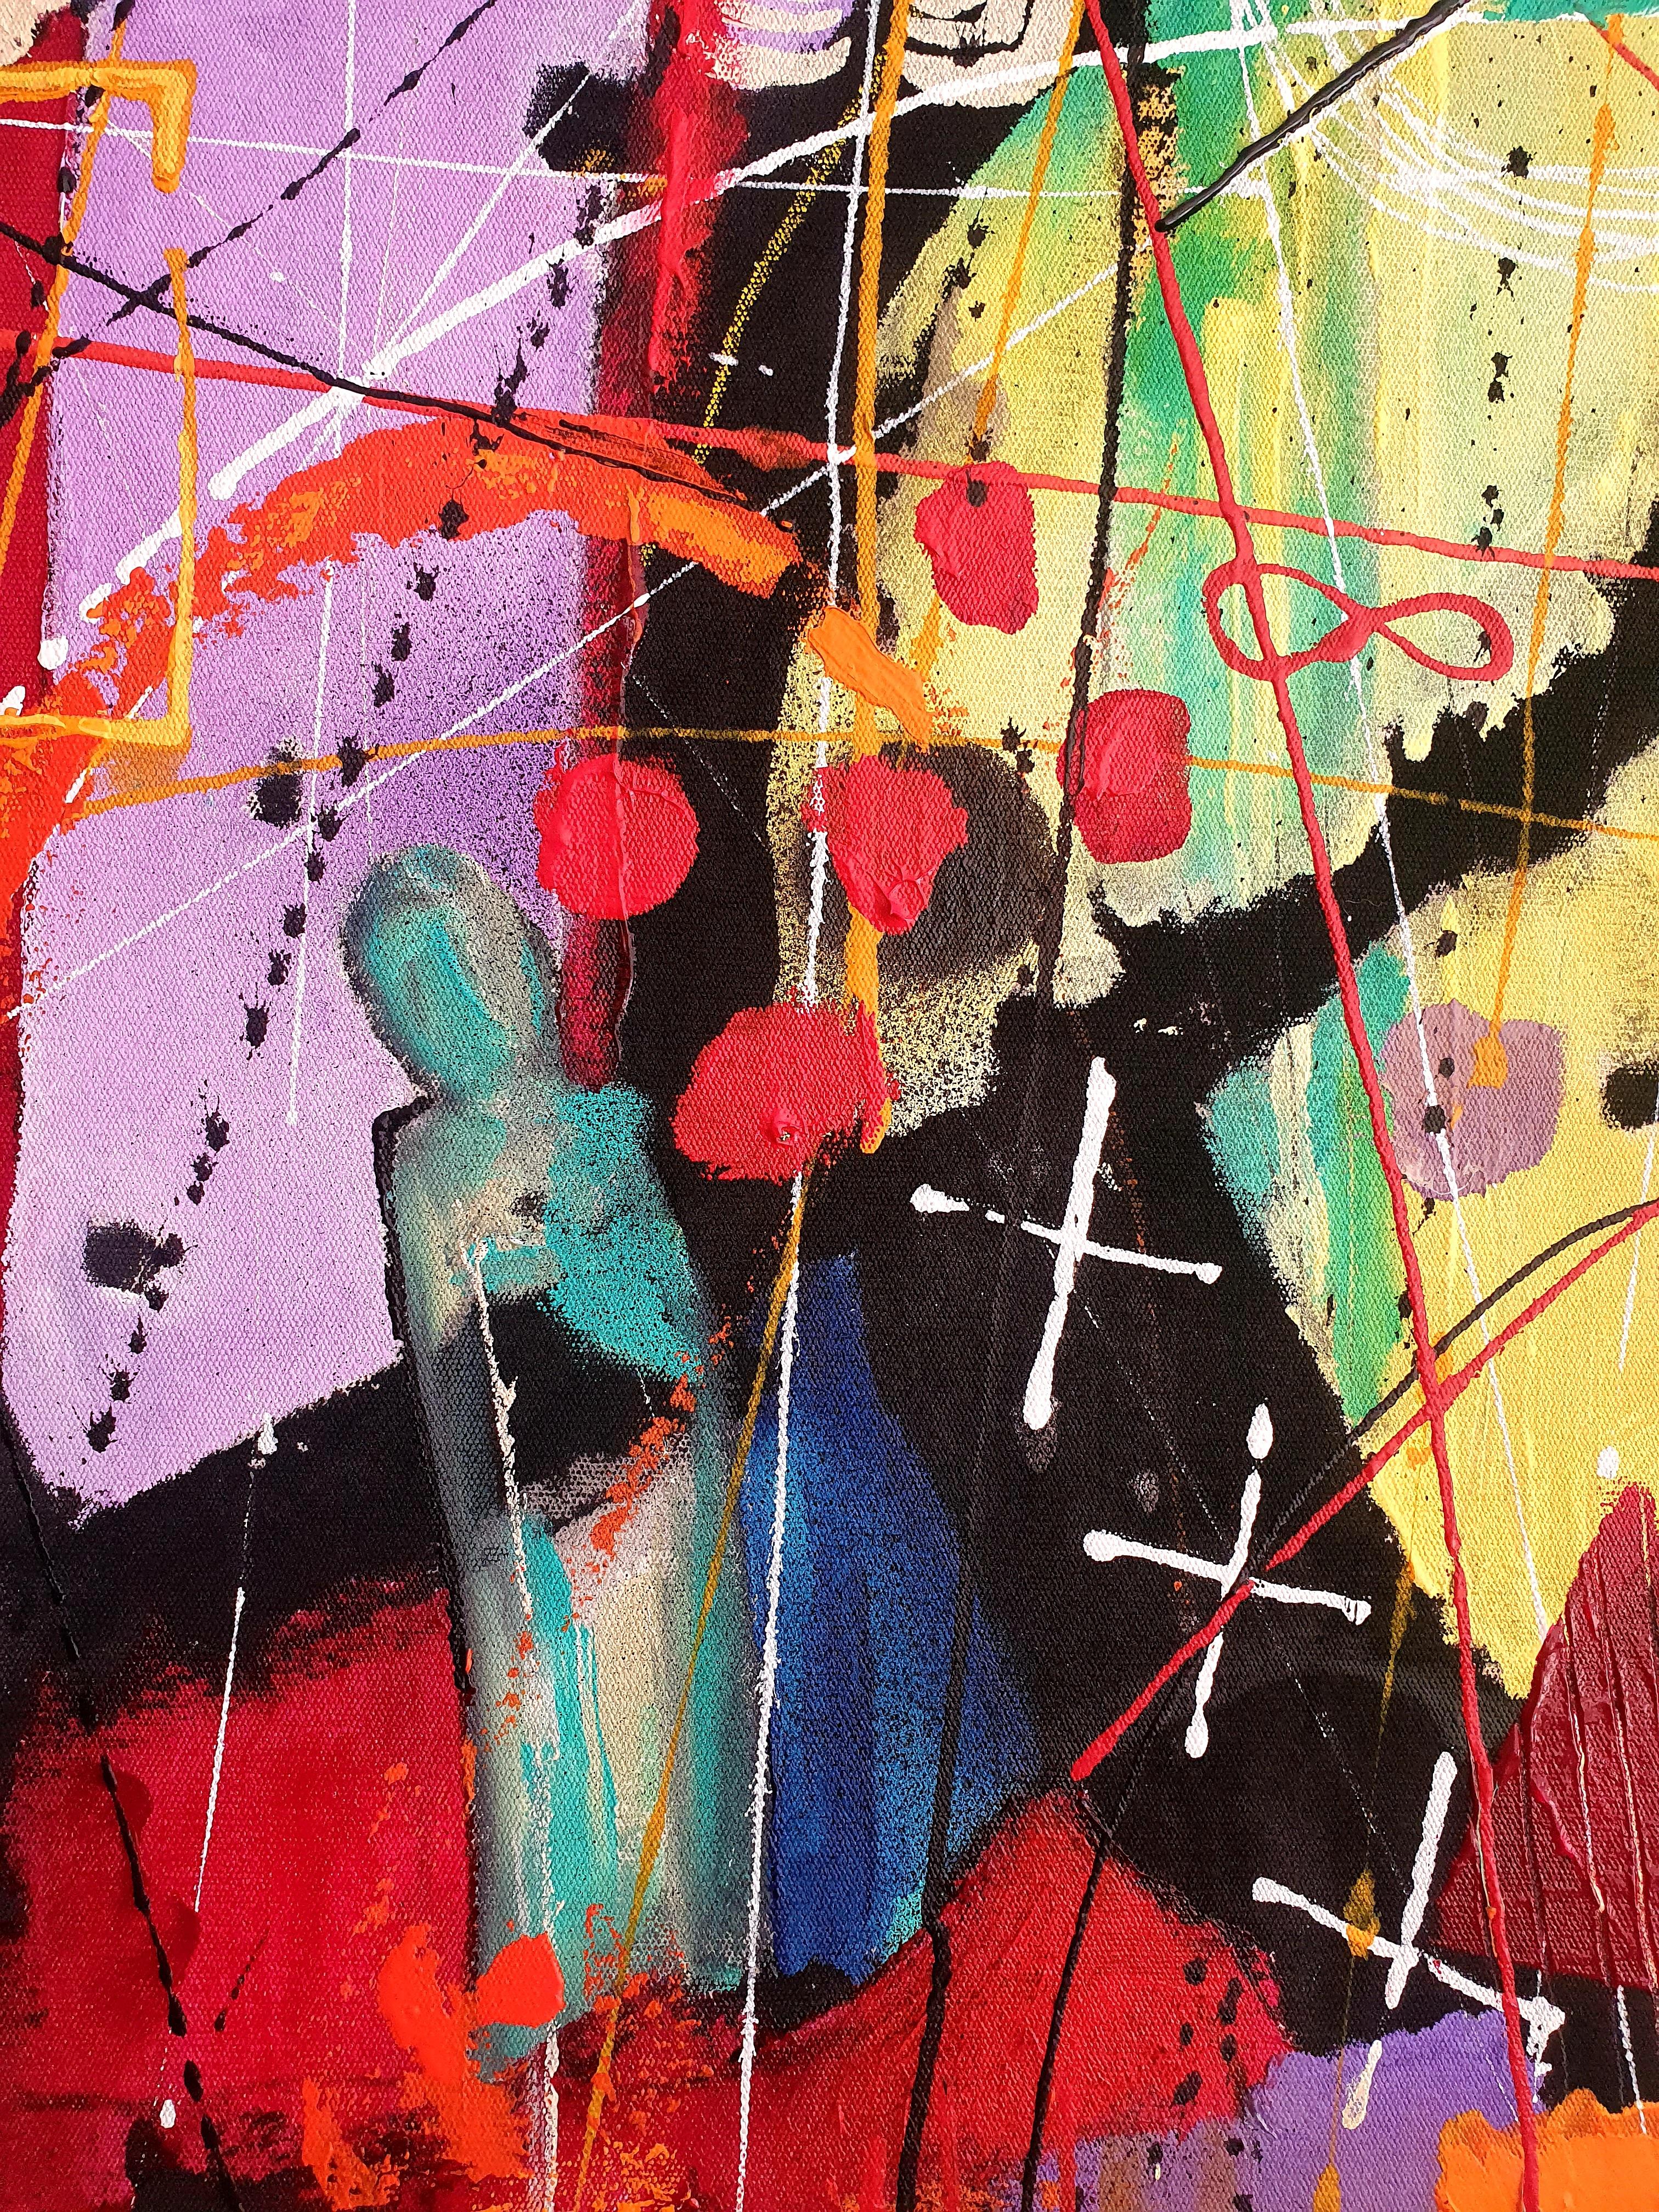 TItle: The Guardians of Circles and Source
Striking Vibrant Expressionist Stylish

This work portrays the circles of life... ebb and flow, feelings of liberty or constraint, movement and rest.

Graffiti, spray-paint, acrylics, mark making and